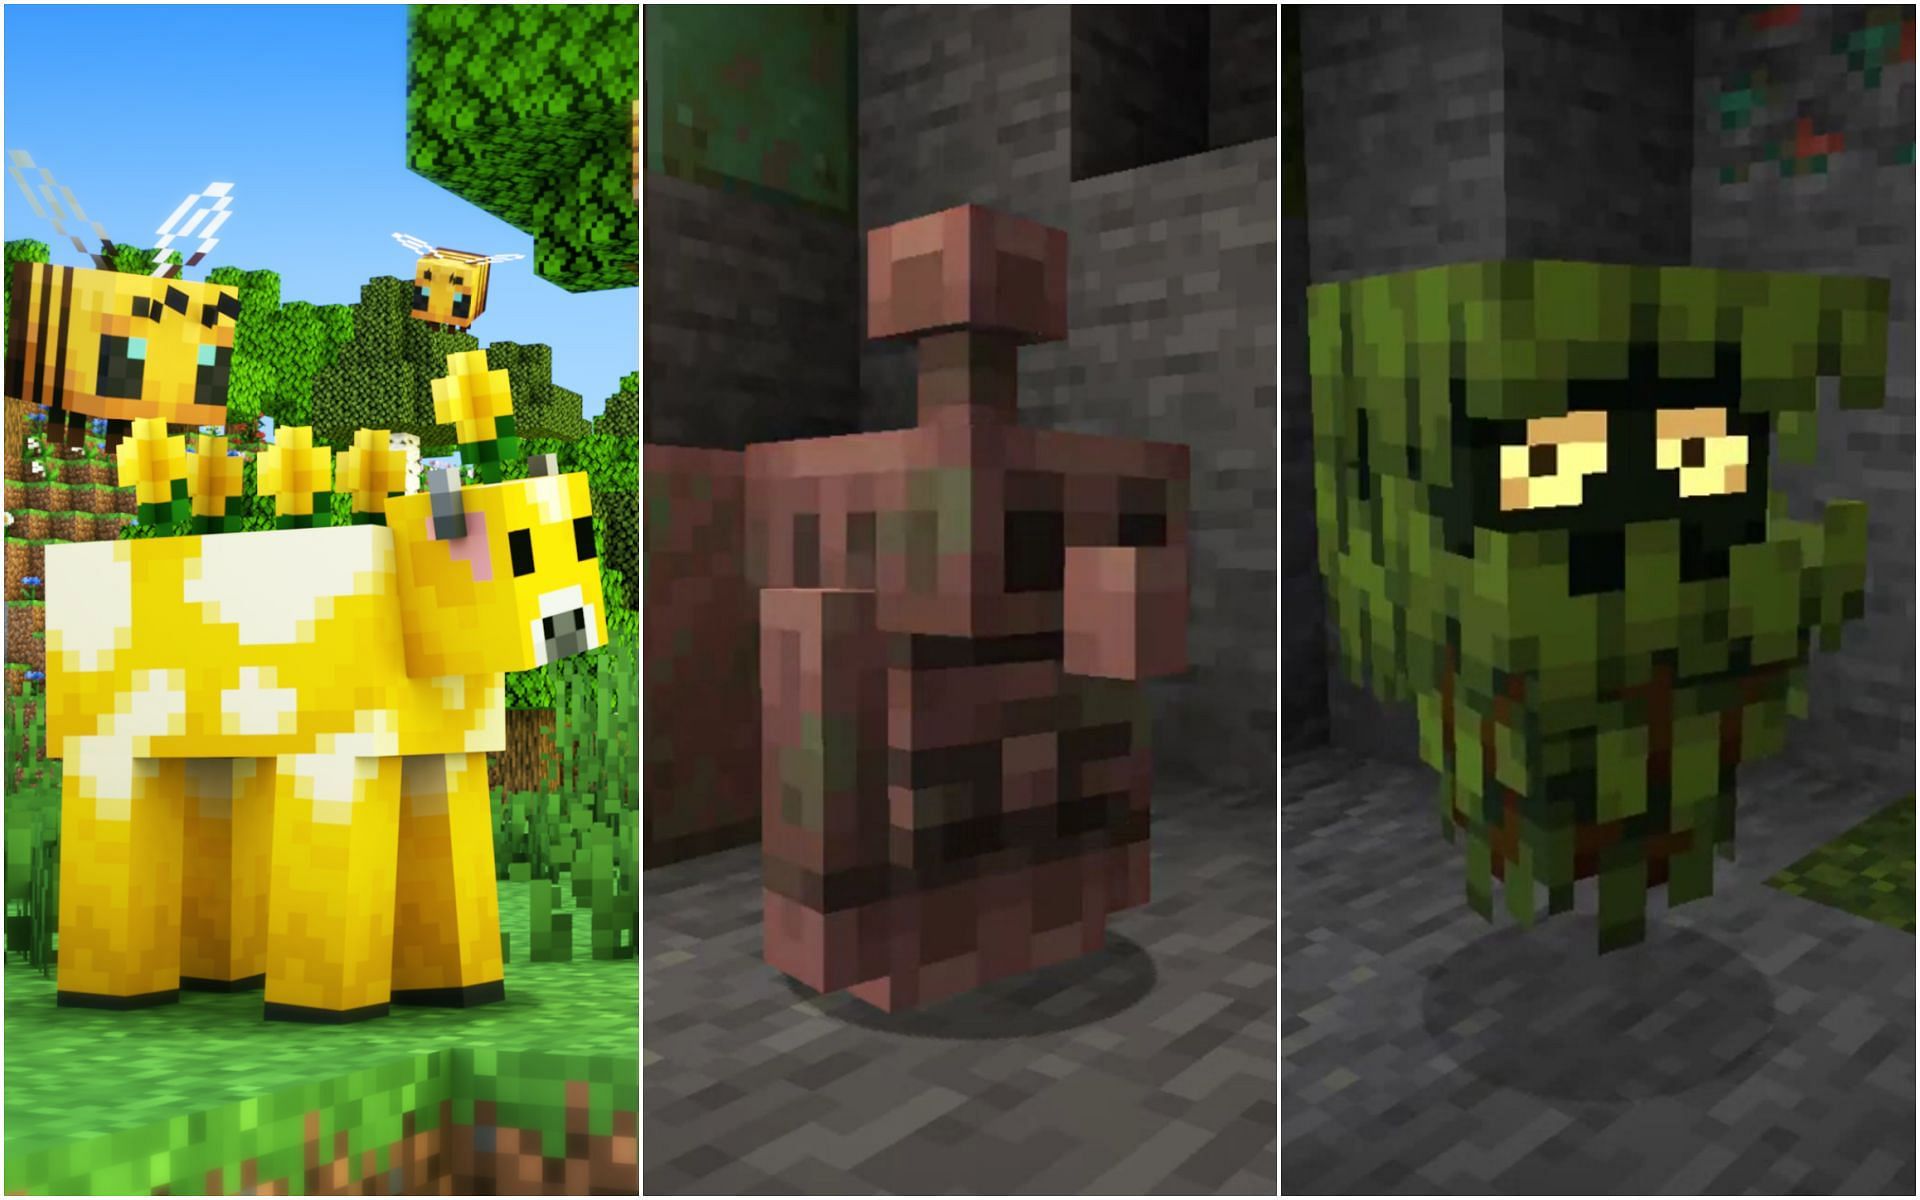 Minecraft Earth exclusive mobs have been modded into the Java edition